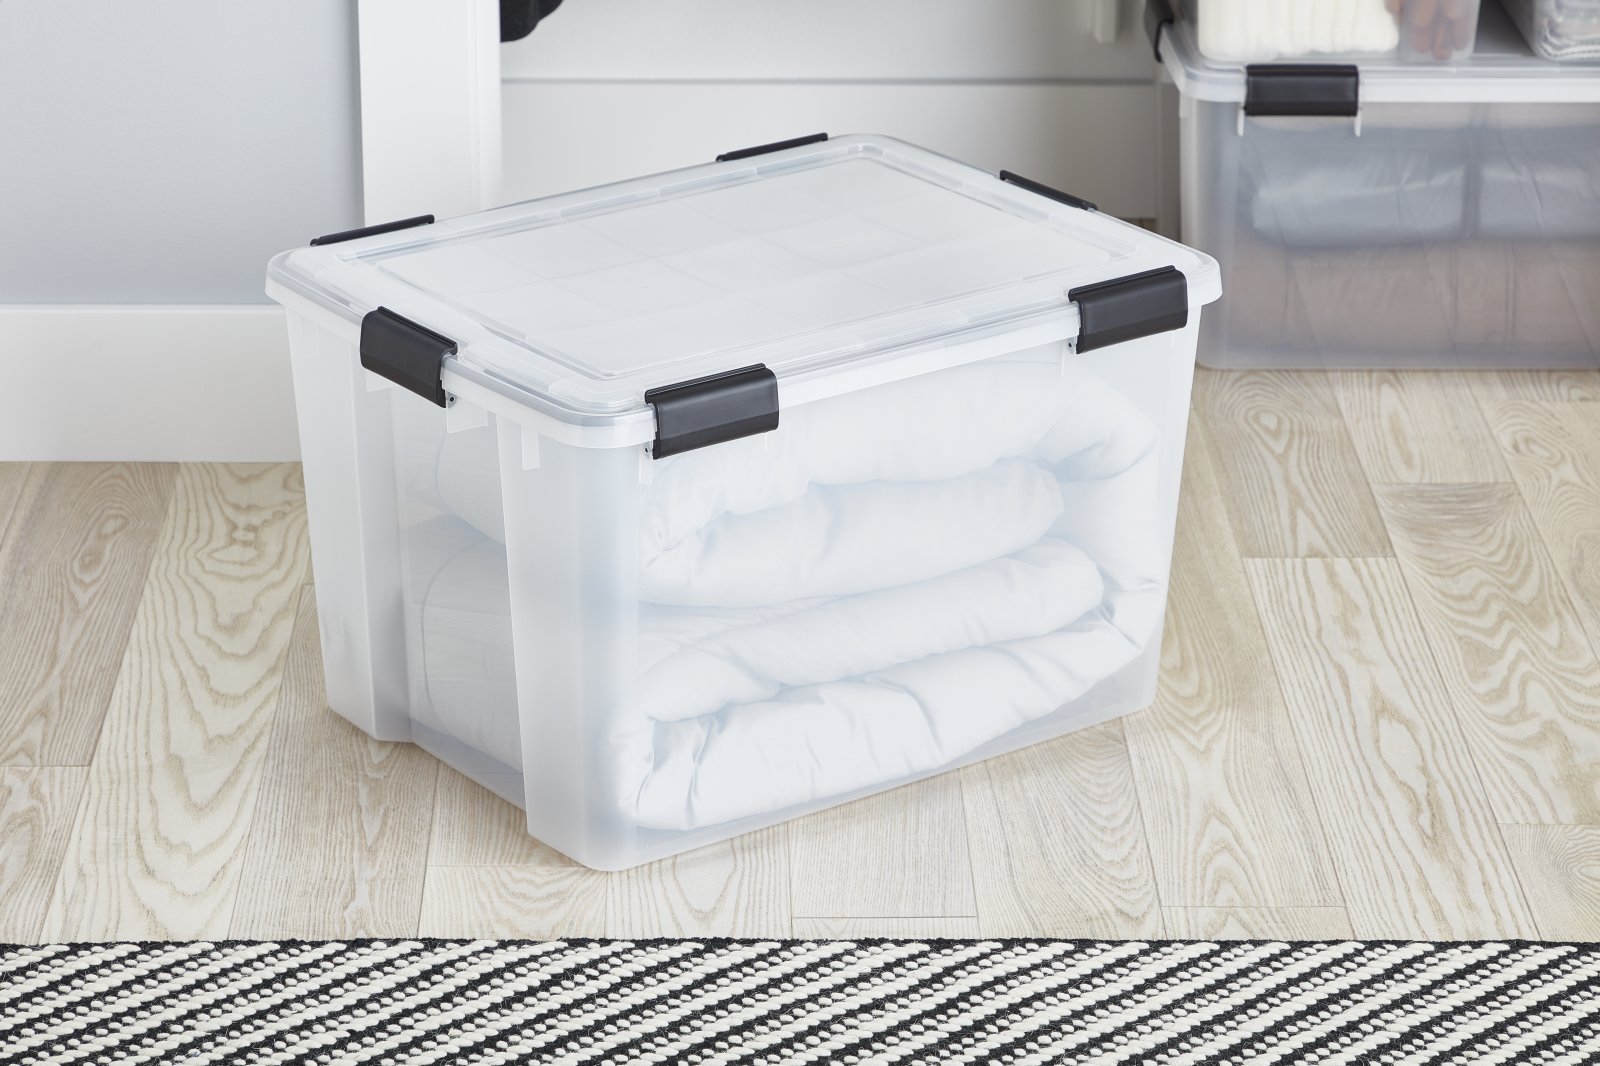 https://images.prismic.io/containerstoriesproduction/2d20c3c8-69b9-4bf5-a6db-1920f228d975_CL_20-Weathertight-Tote-with-Wheels-Clear_D_RGB+46.jpg?auto=format